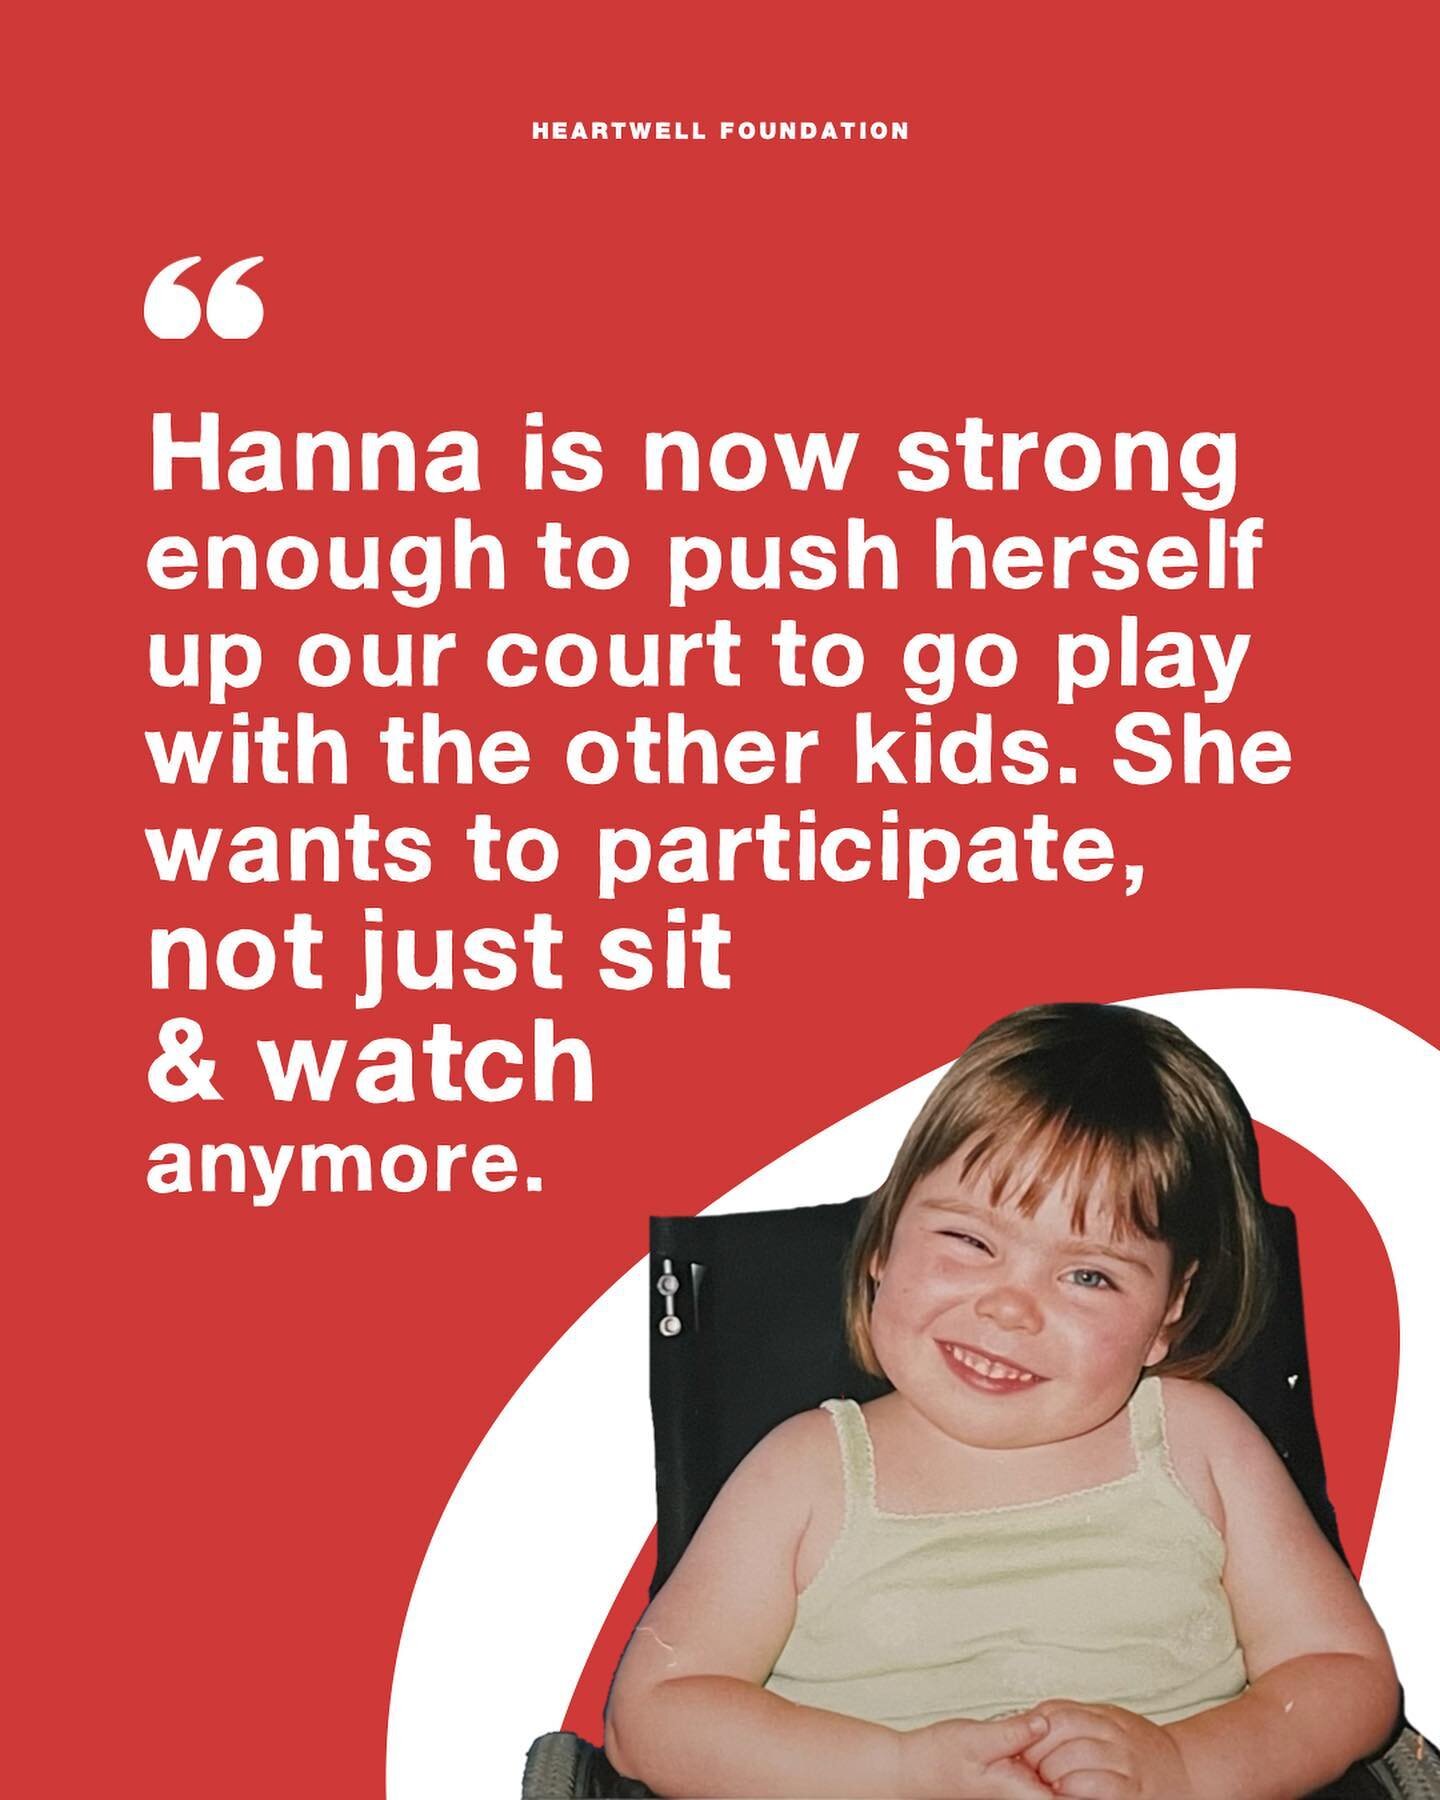 Katrina Hartley, talking about her beautiful daughter, Hanna.

#CreatingALevelPlayingField 

Slide one
In white text over maroon background: &ldquo;Hanna is now strong enough to push herself up our court to go play with the other kids. She wants to p